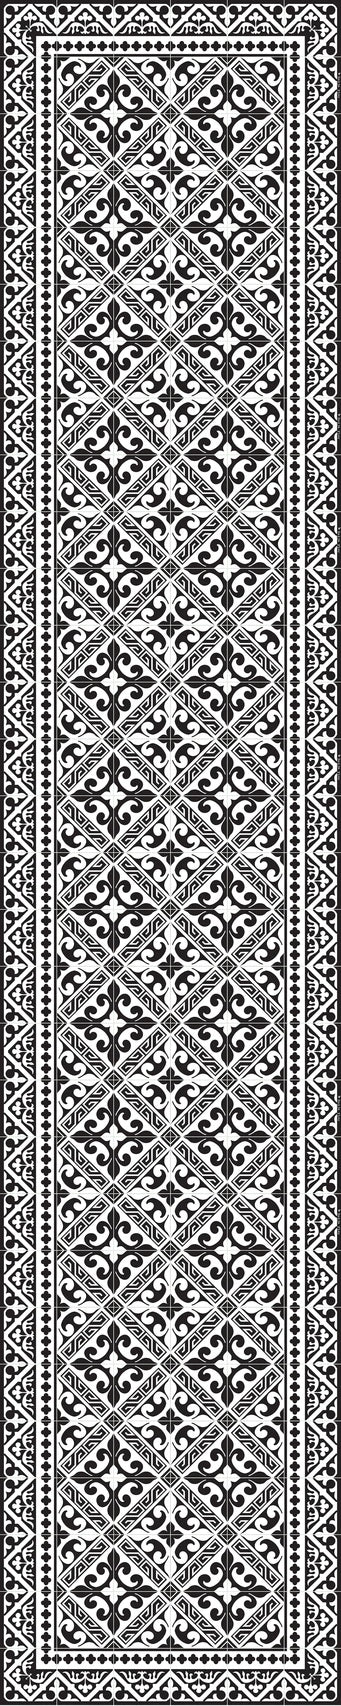 Beija Flor Black and White Fleur de Lys Extra-Long Table Runner (13" x 60") (Buy 2 Get 1 Free!) Rugs Beija Flor Brand_Beija Flor Classic Tile CLEAN OUT SALE Home_Decor Home_Table Runners BW22-TRL